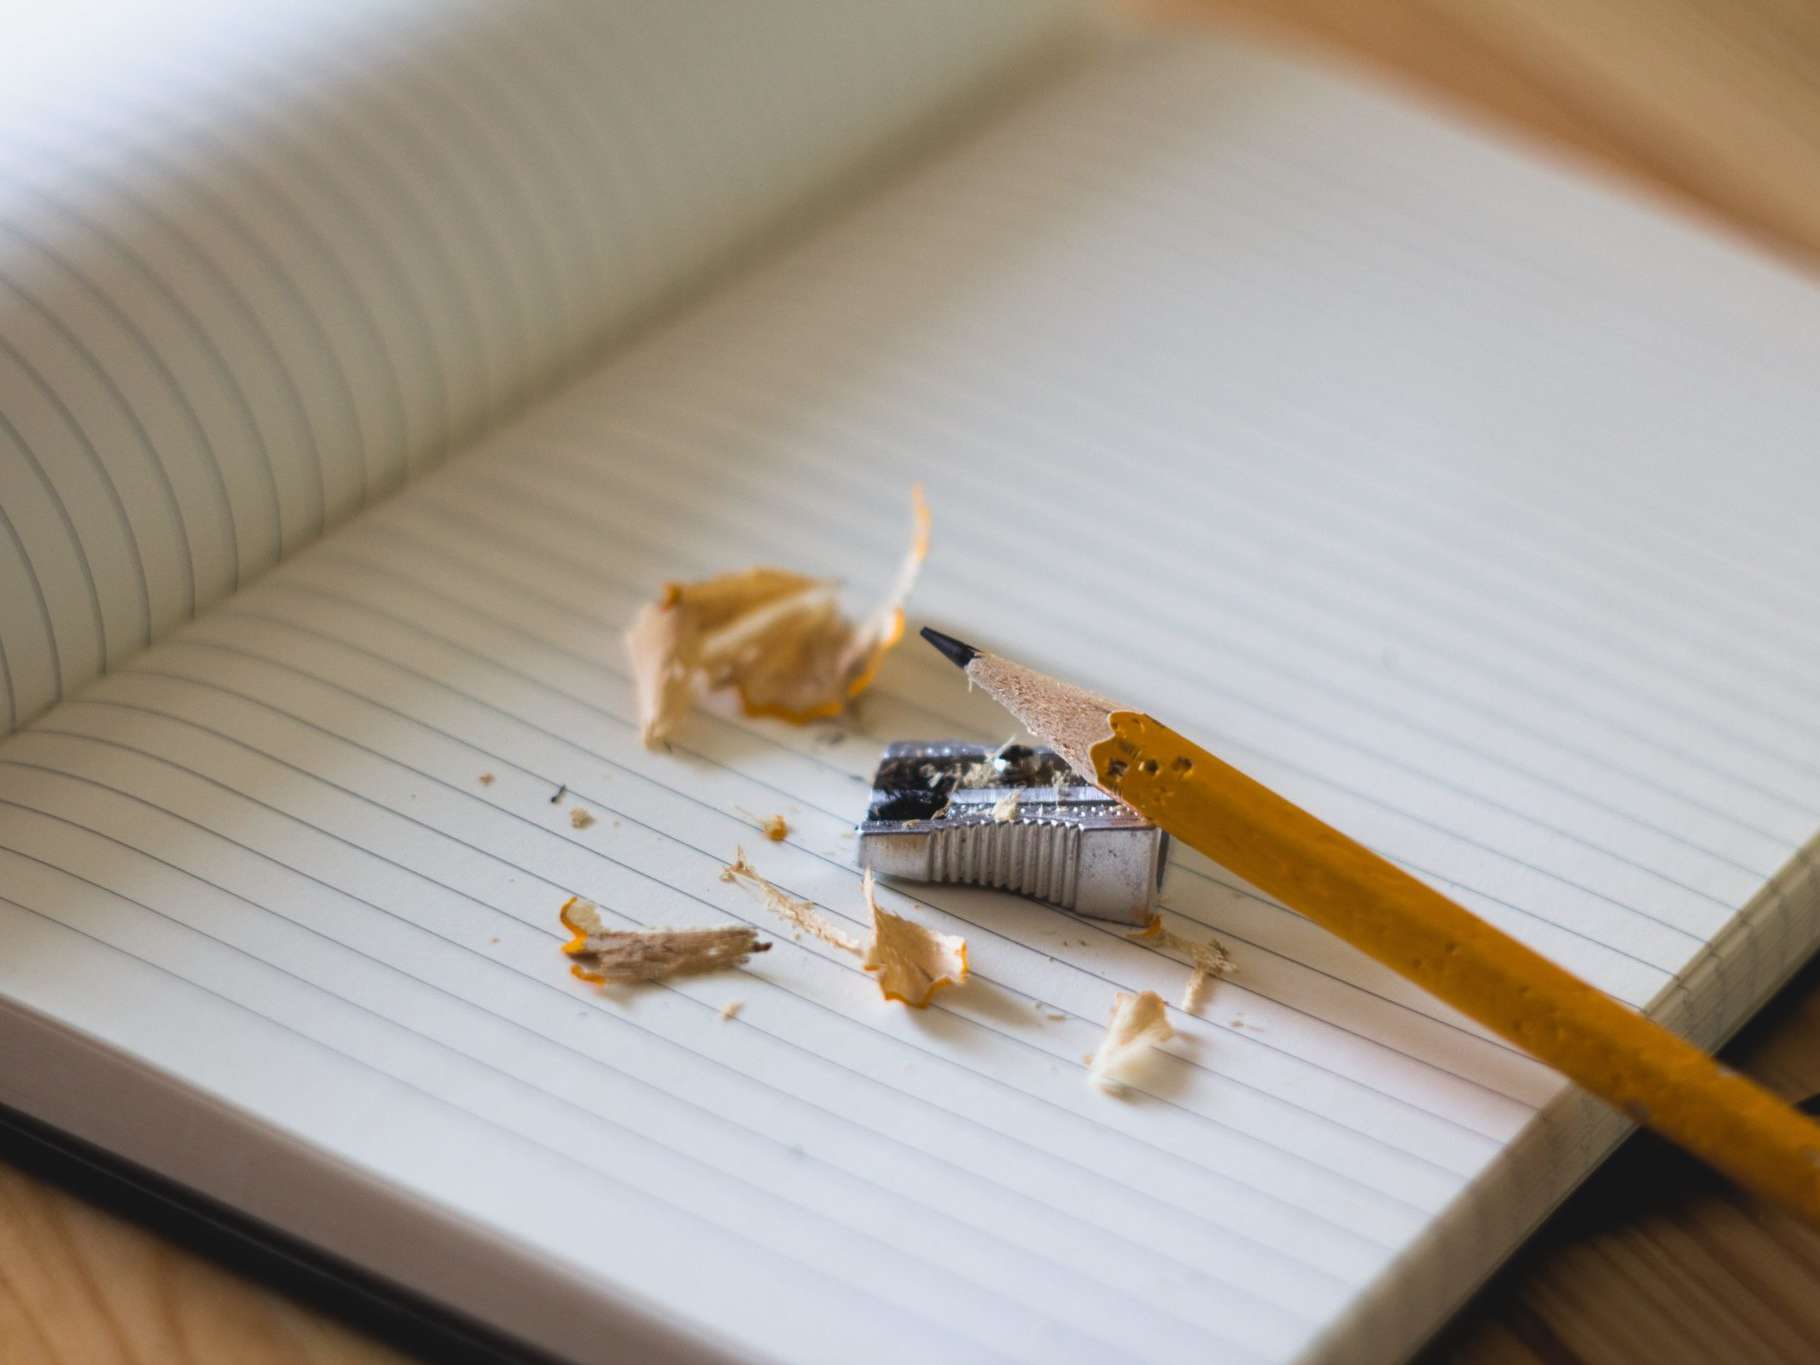 An image of a notebook with pencil shavings on top of it